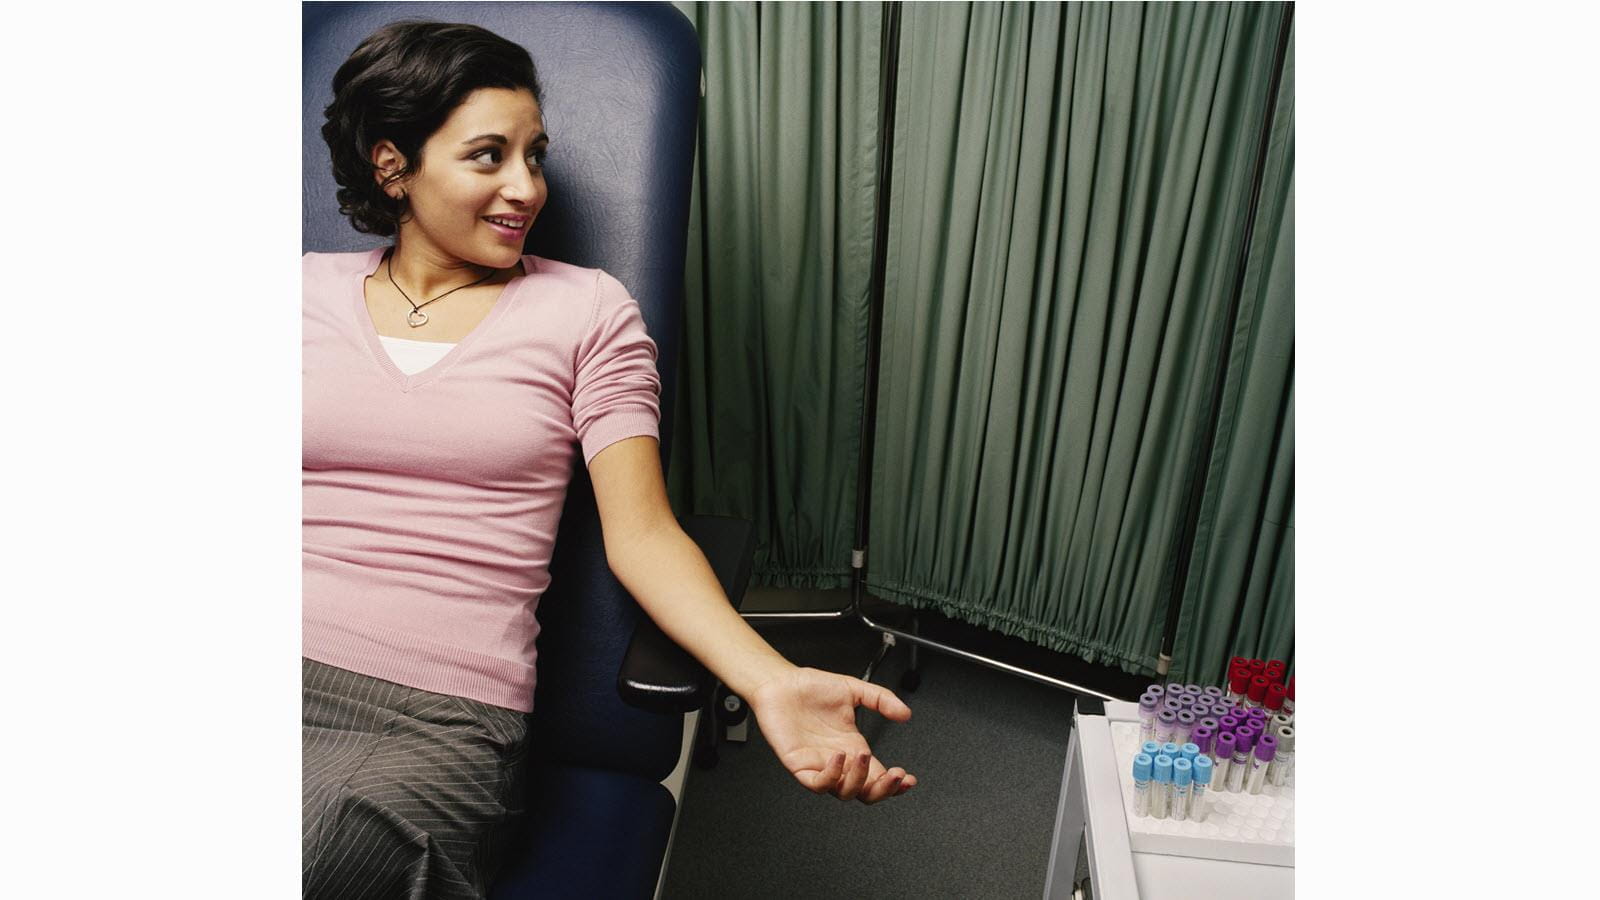 A woman prepares to give a blood sample